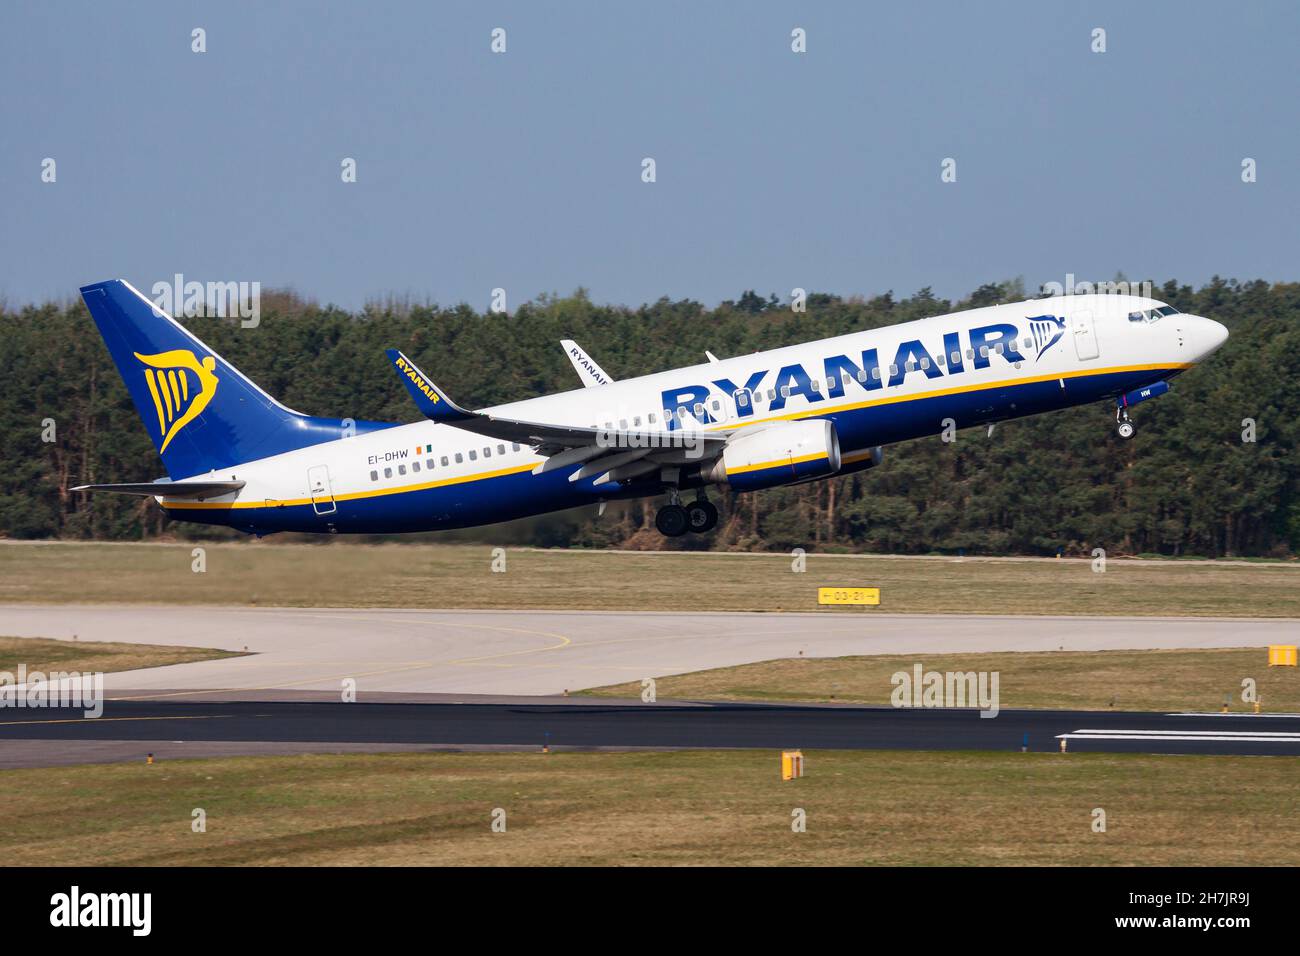 Eindhoven, Netherlands - April 16, 2015: Ryanair passenger plane at airport. Schedule flight travel. Aviation and aircraft. Air transport. Global inte Stock Photo